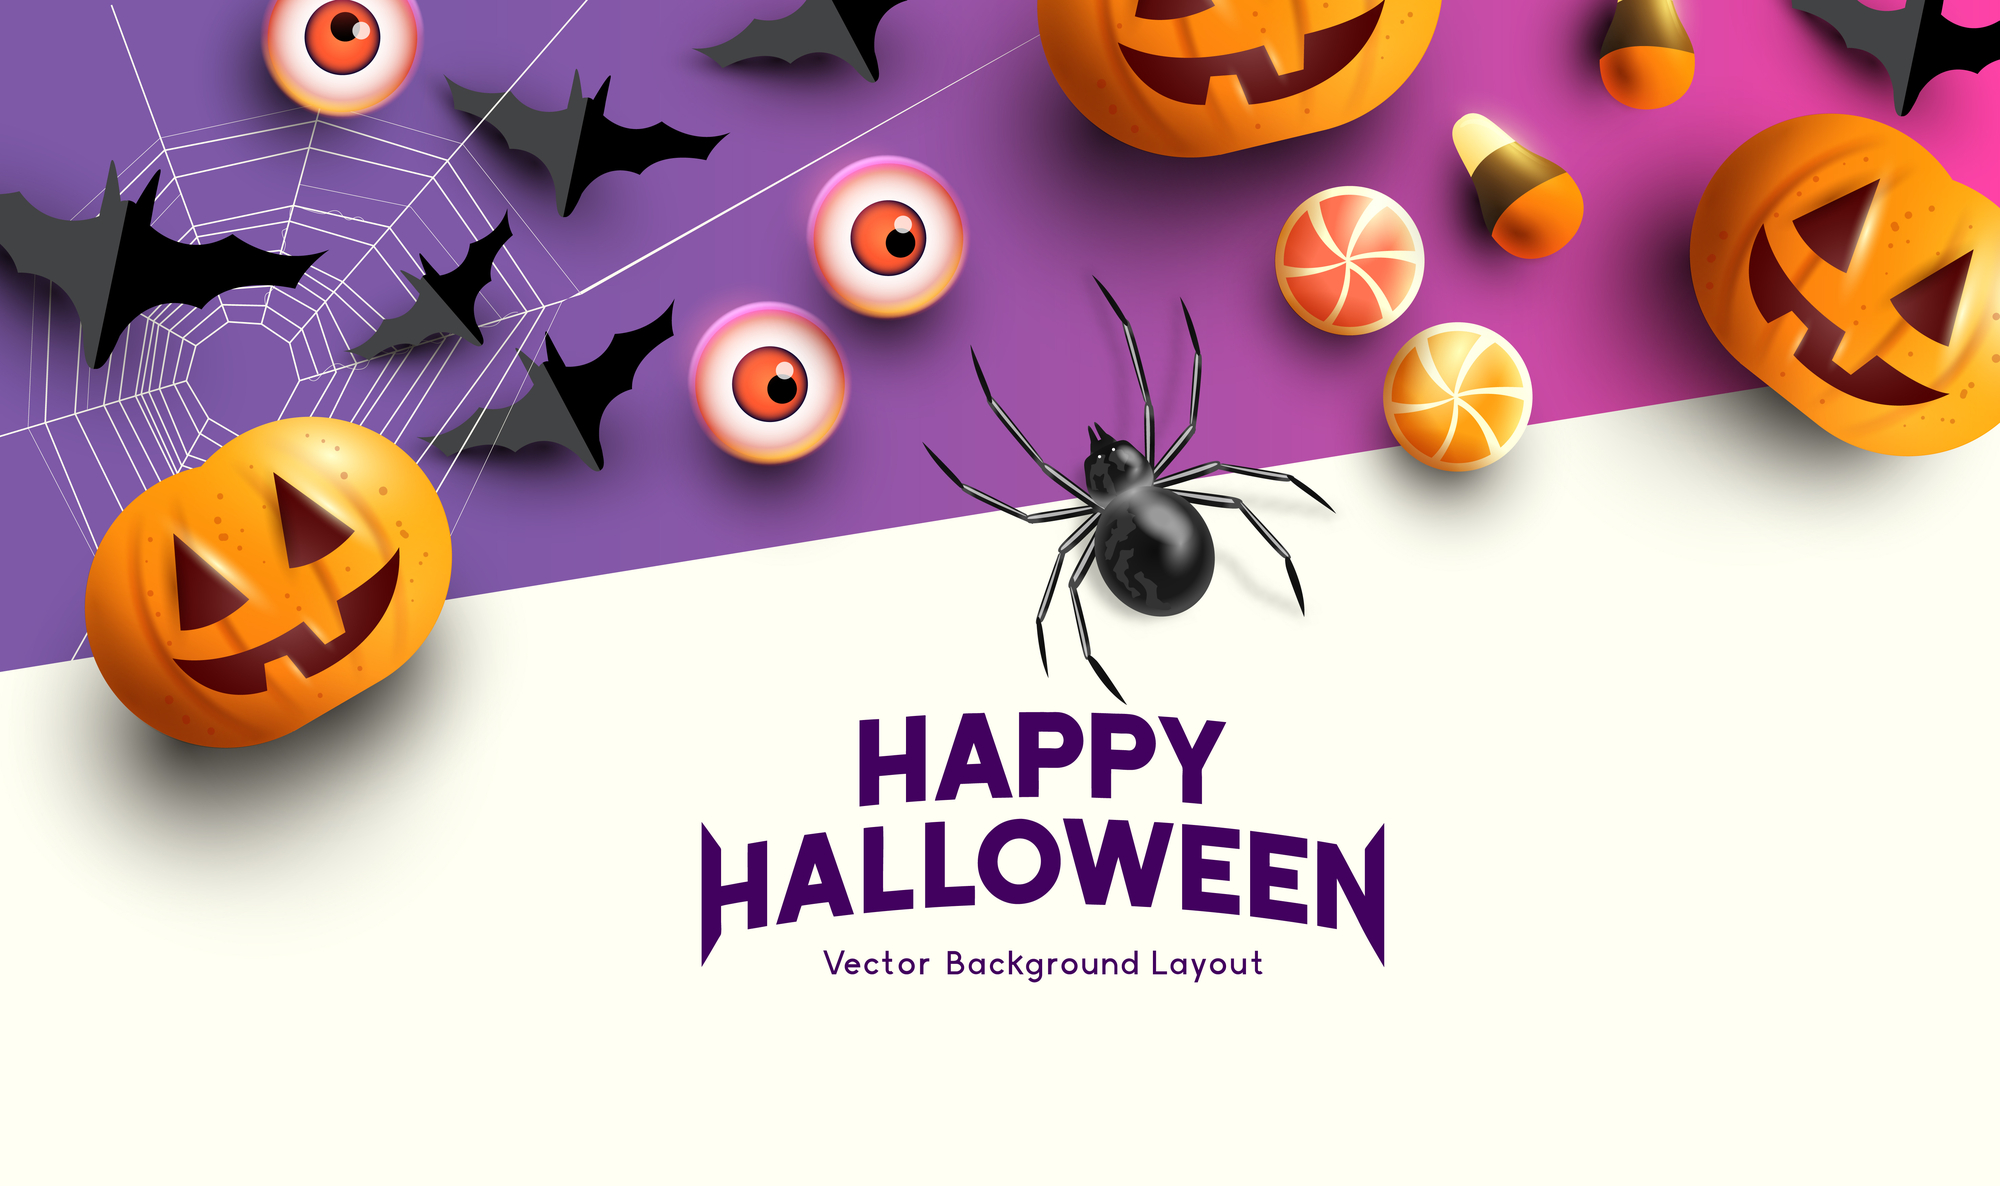 Your Halloween Kit: Thematic Design Templates, Photo Collections, And ...